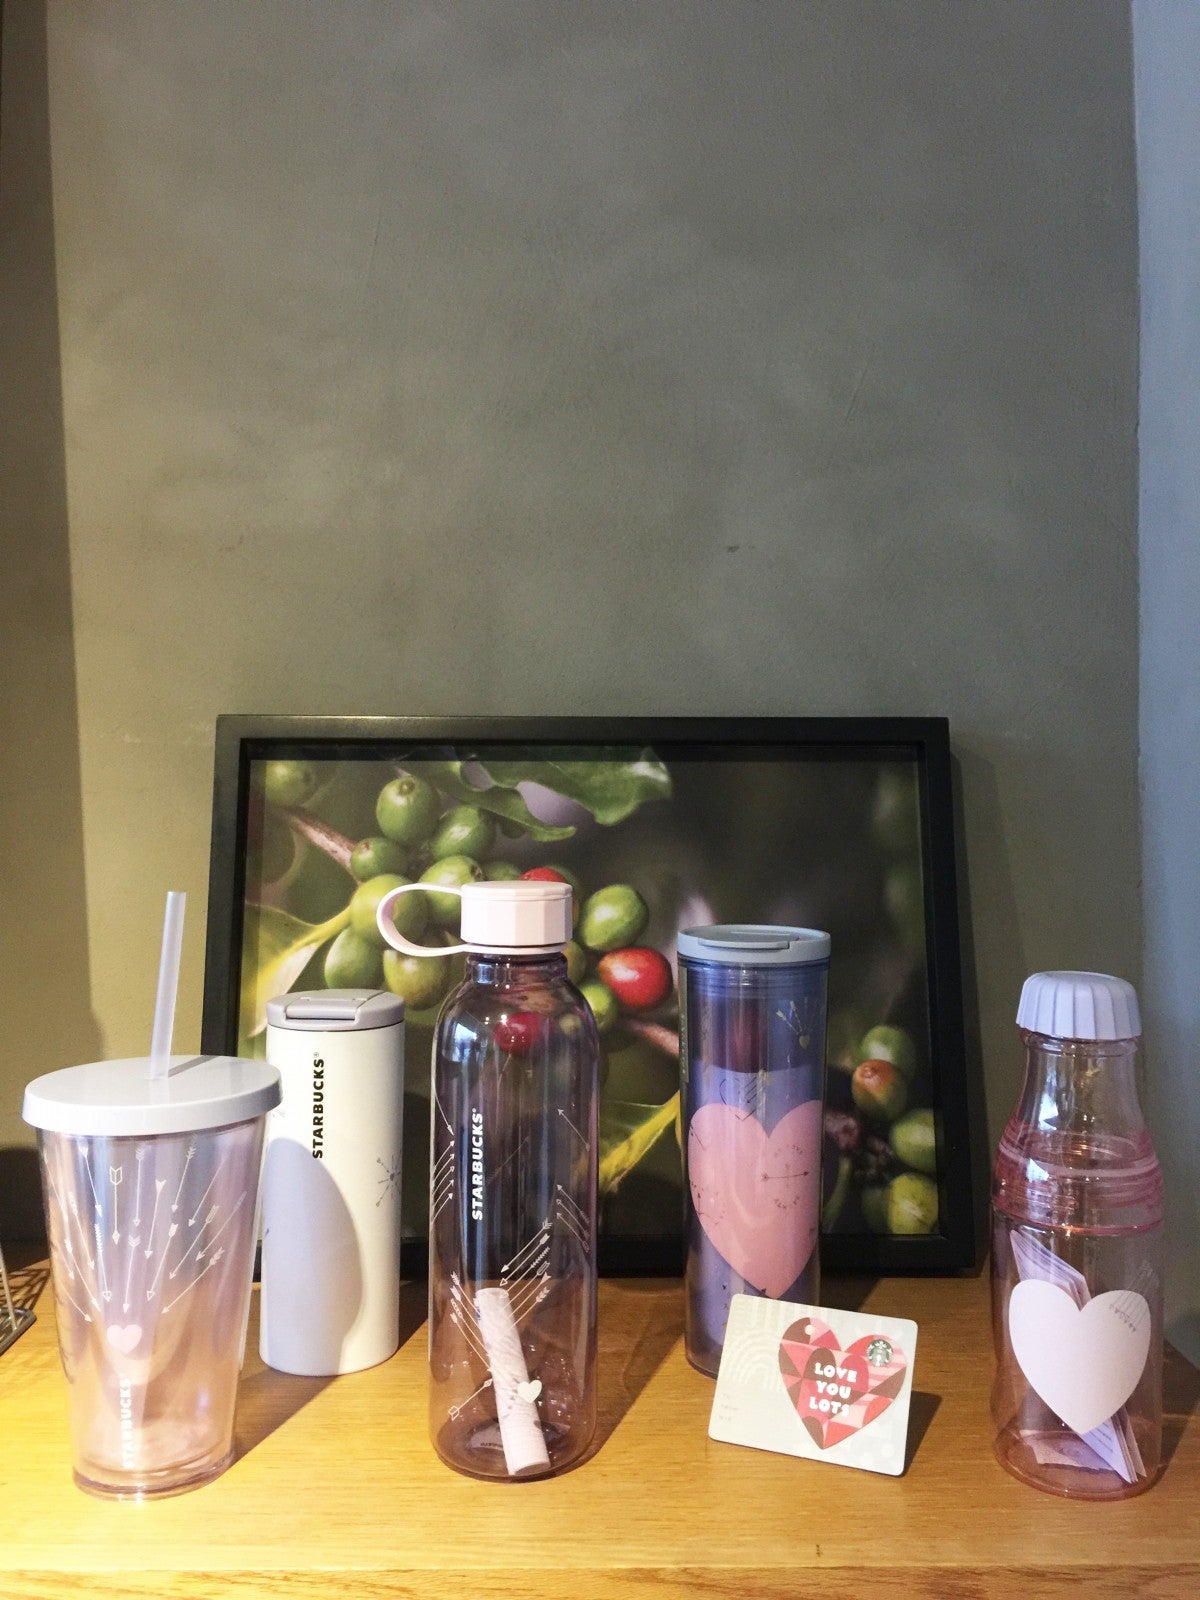 Starbucks M'sia's New Valentine Collection is Available on Feb 1 & We Can't Wait to Get Them! - WORLD OF BUZZ